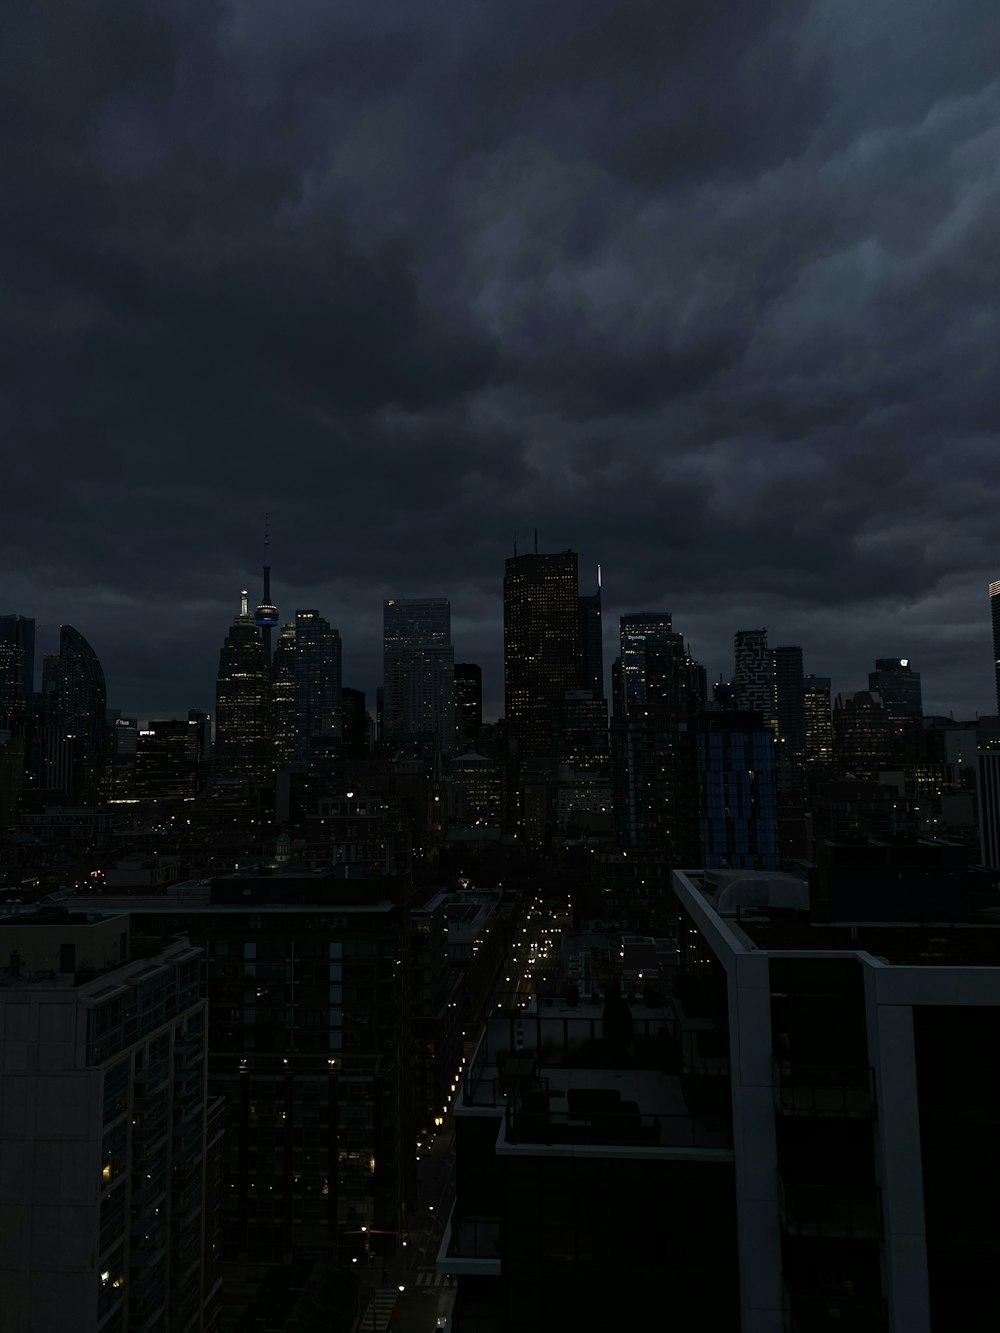 city skyline under gray cloudy sky during night time